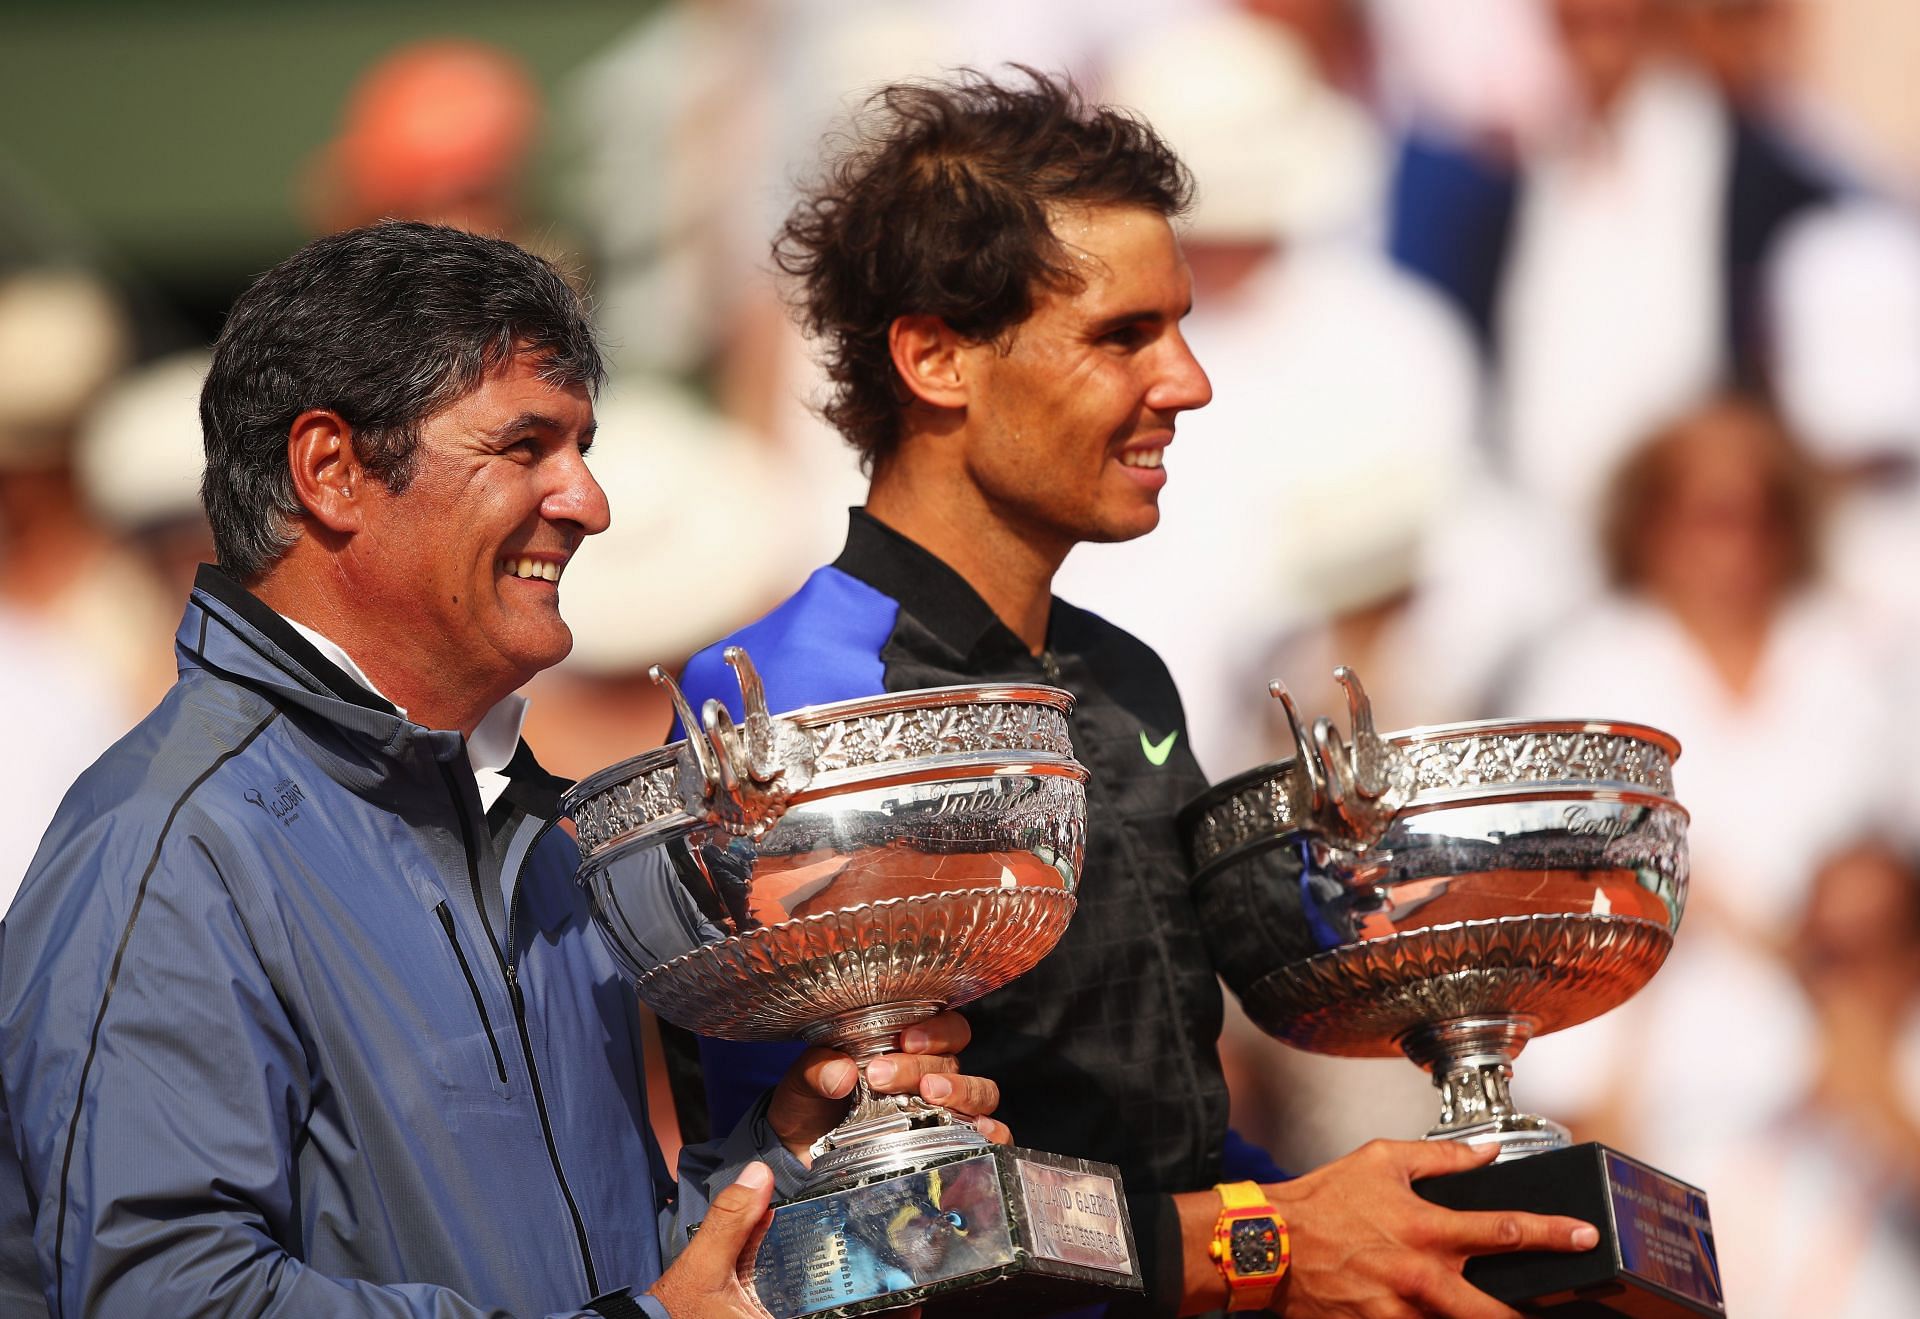 Toni Nadal and Rafael Nadal at the French Open 2017